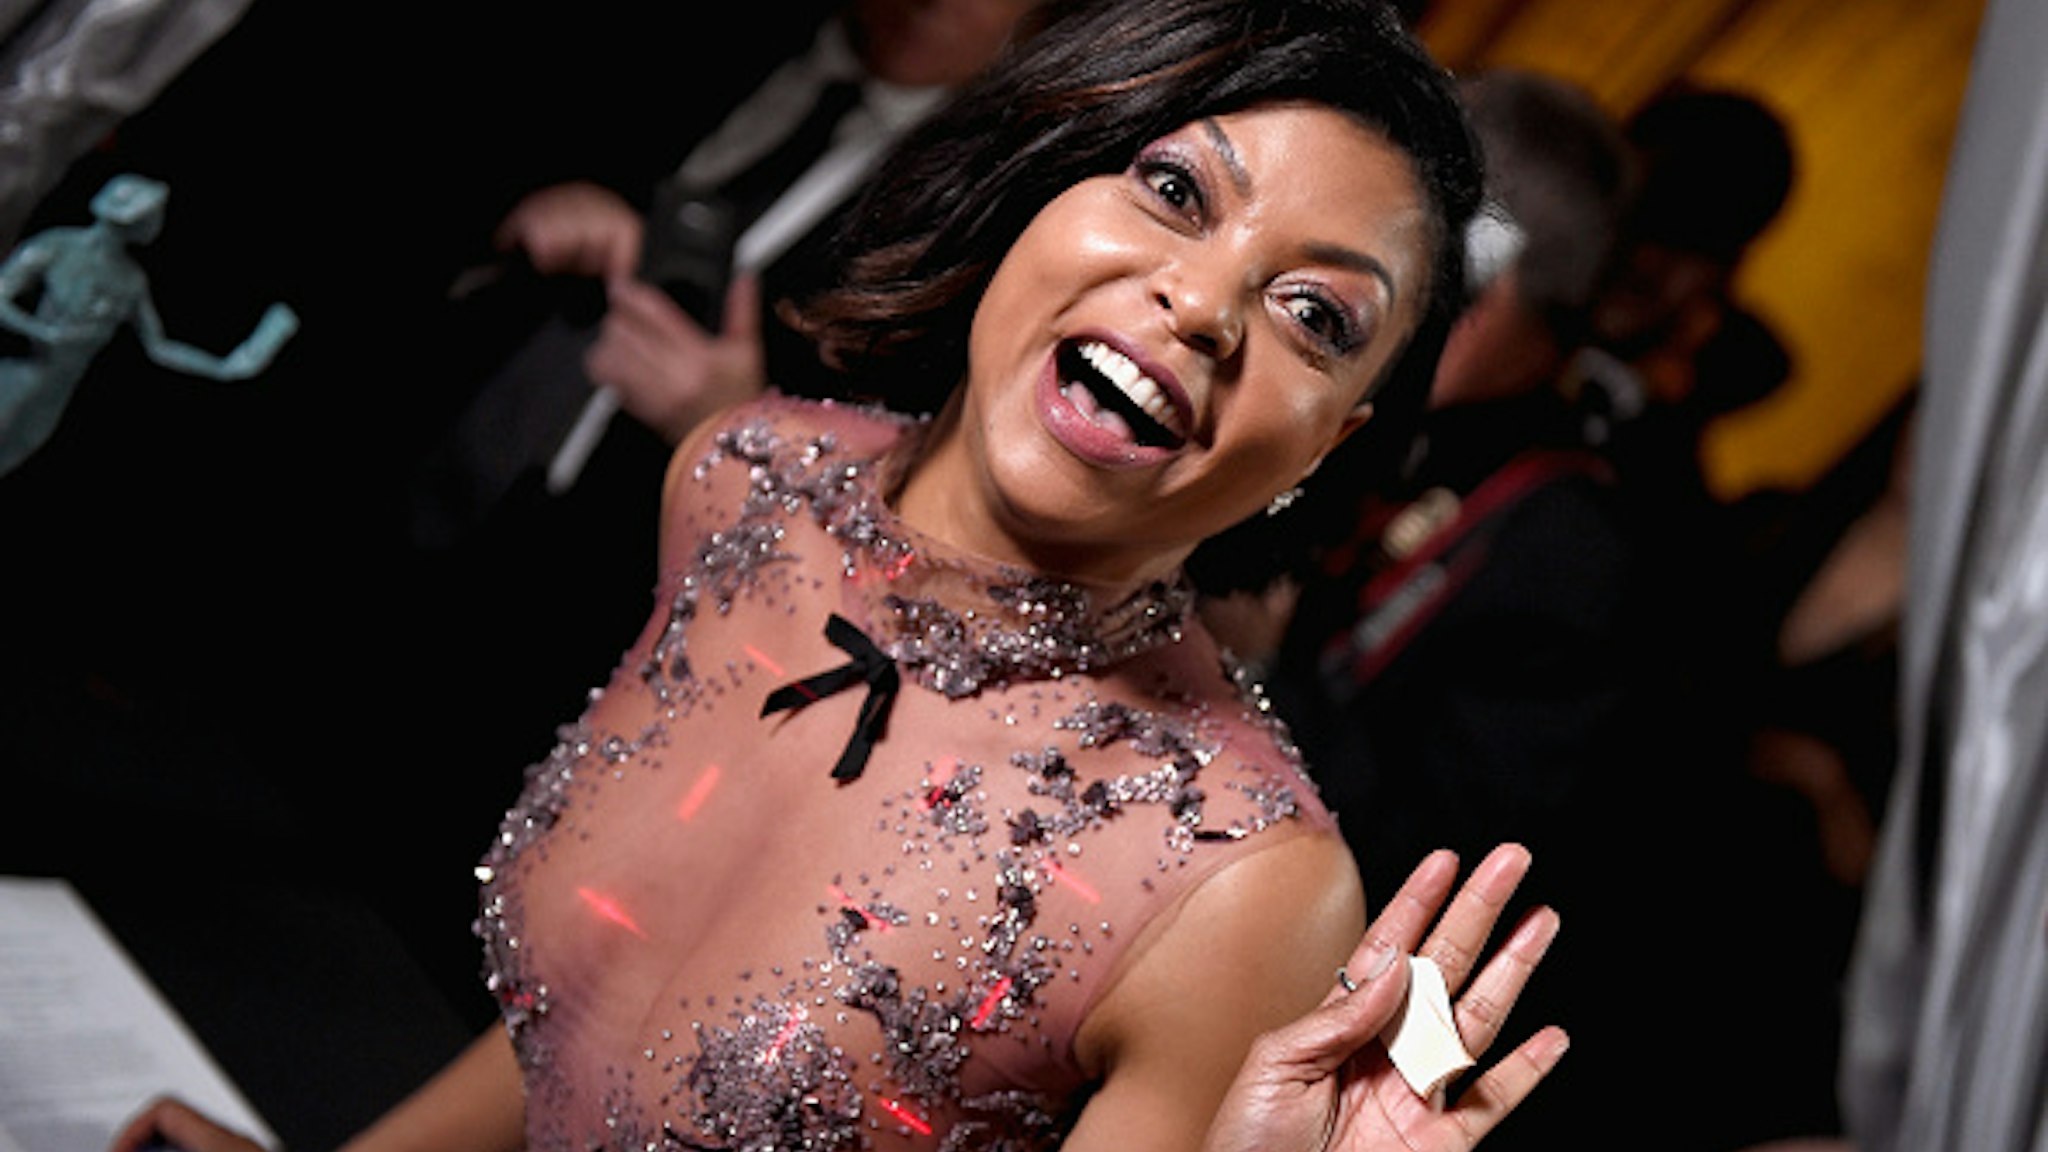 LOS ANGELES, CA - JANUARY 29: Actor Taraji P. Henson, winner of the Outstanding Cast in a Motion Picture award for 'Hidden Figures', poses backstage during The 23rd Annual Screen Actors Guild Awards at The Shrine Auditorium on January 29, 2017 in Los Angeles, California. 26592_017